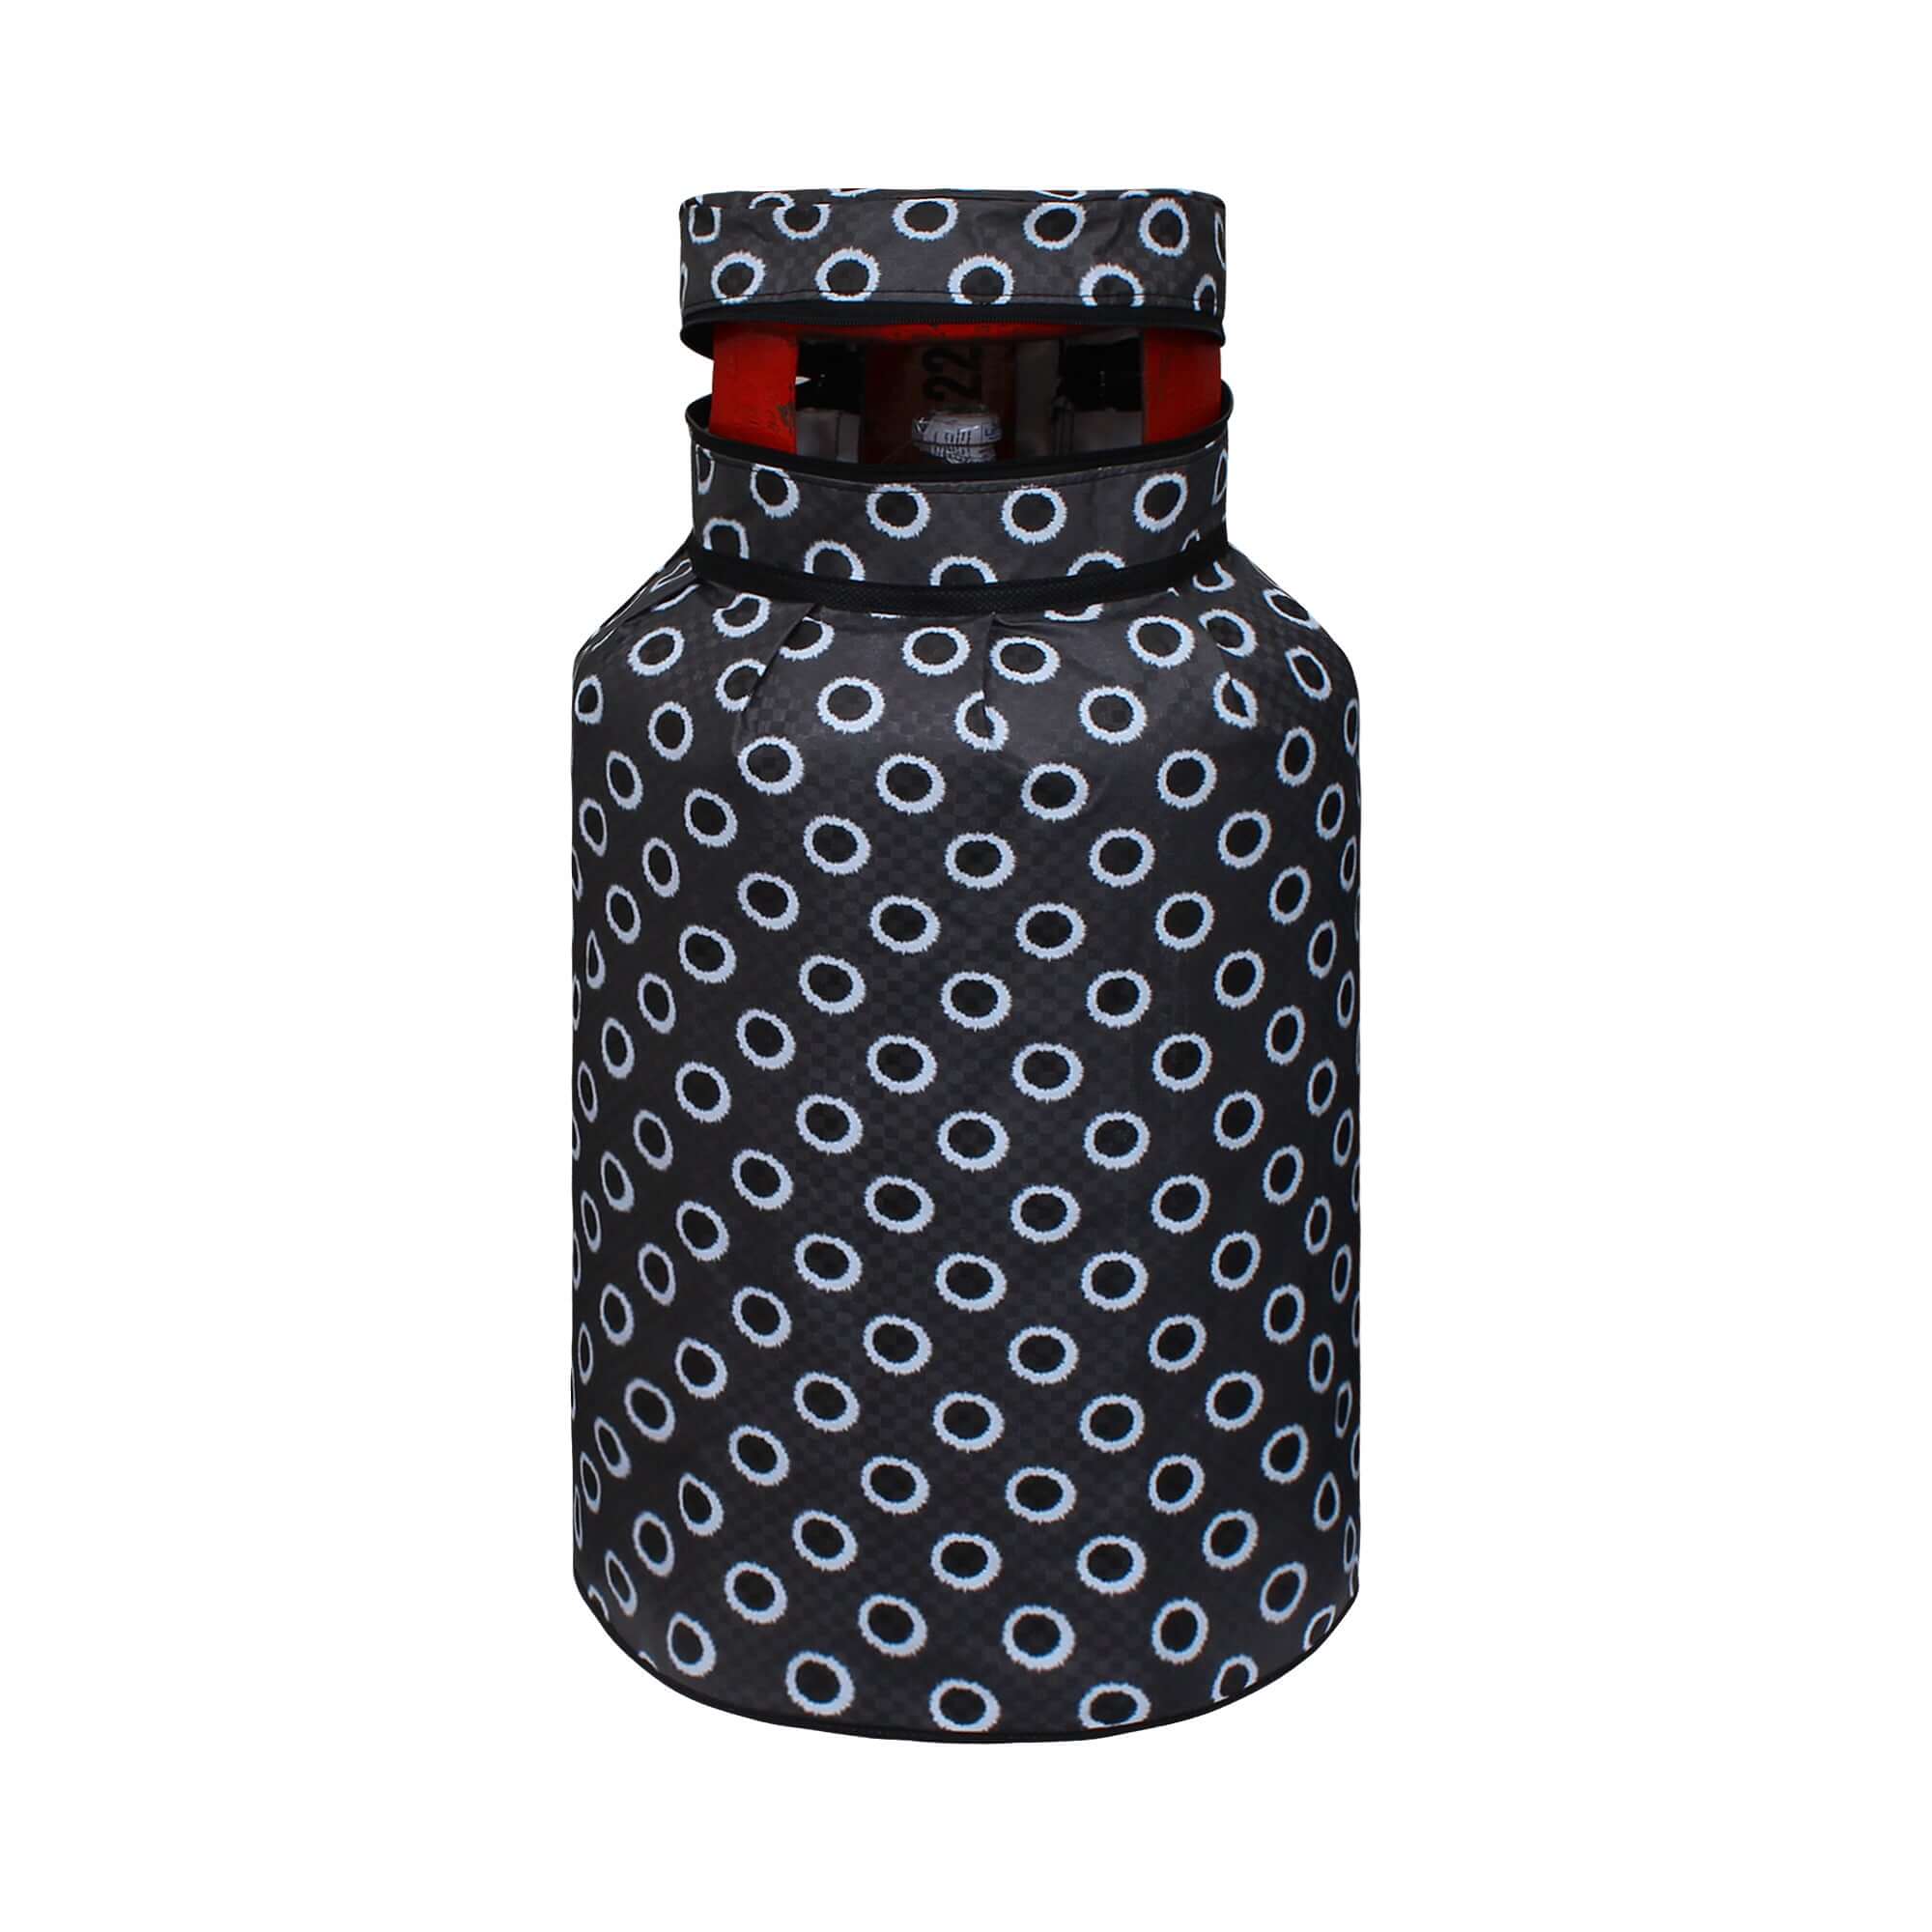 LPG Gas Cylinder Cover, SA17 - Dream Care Furnishings Private Limited